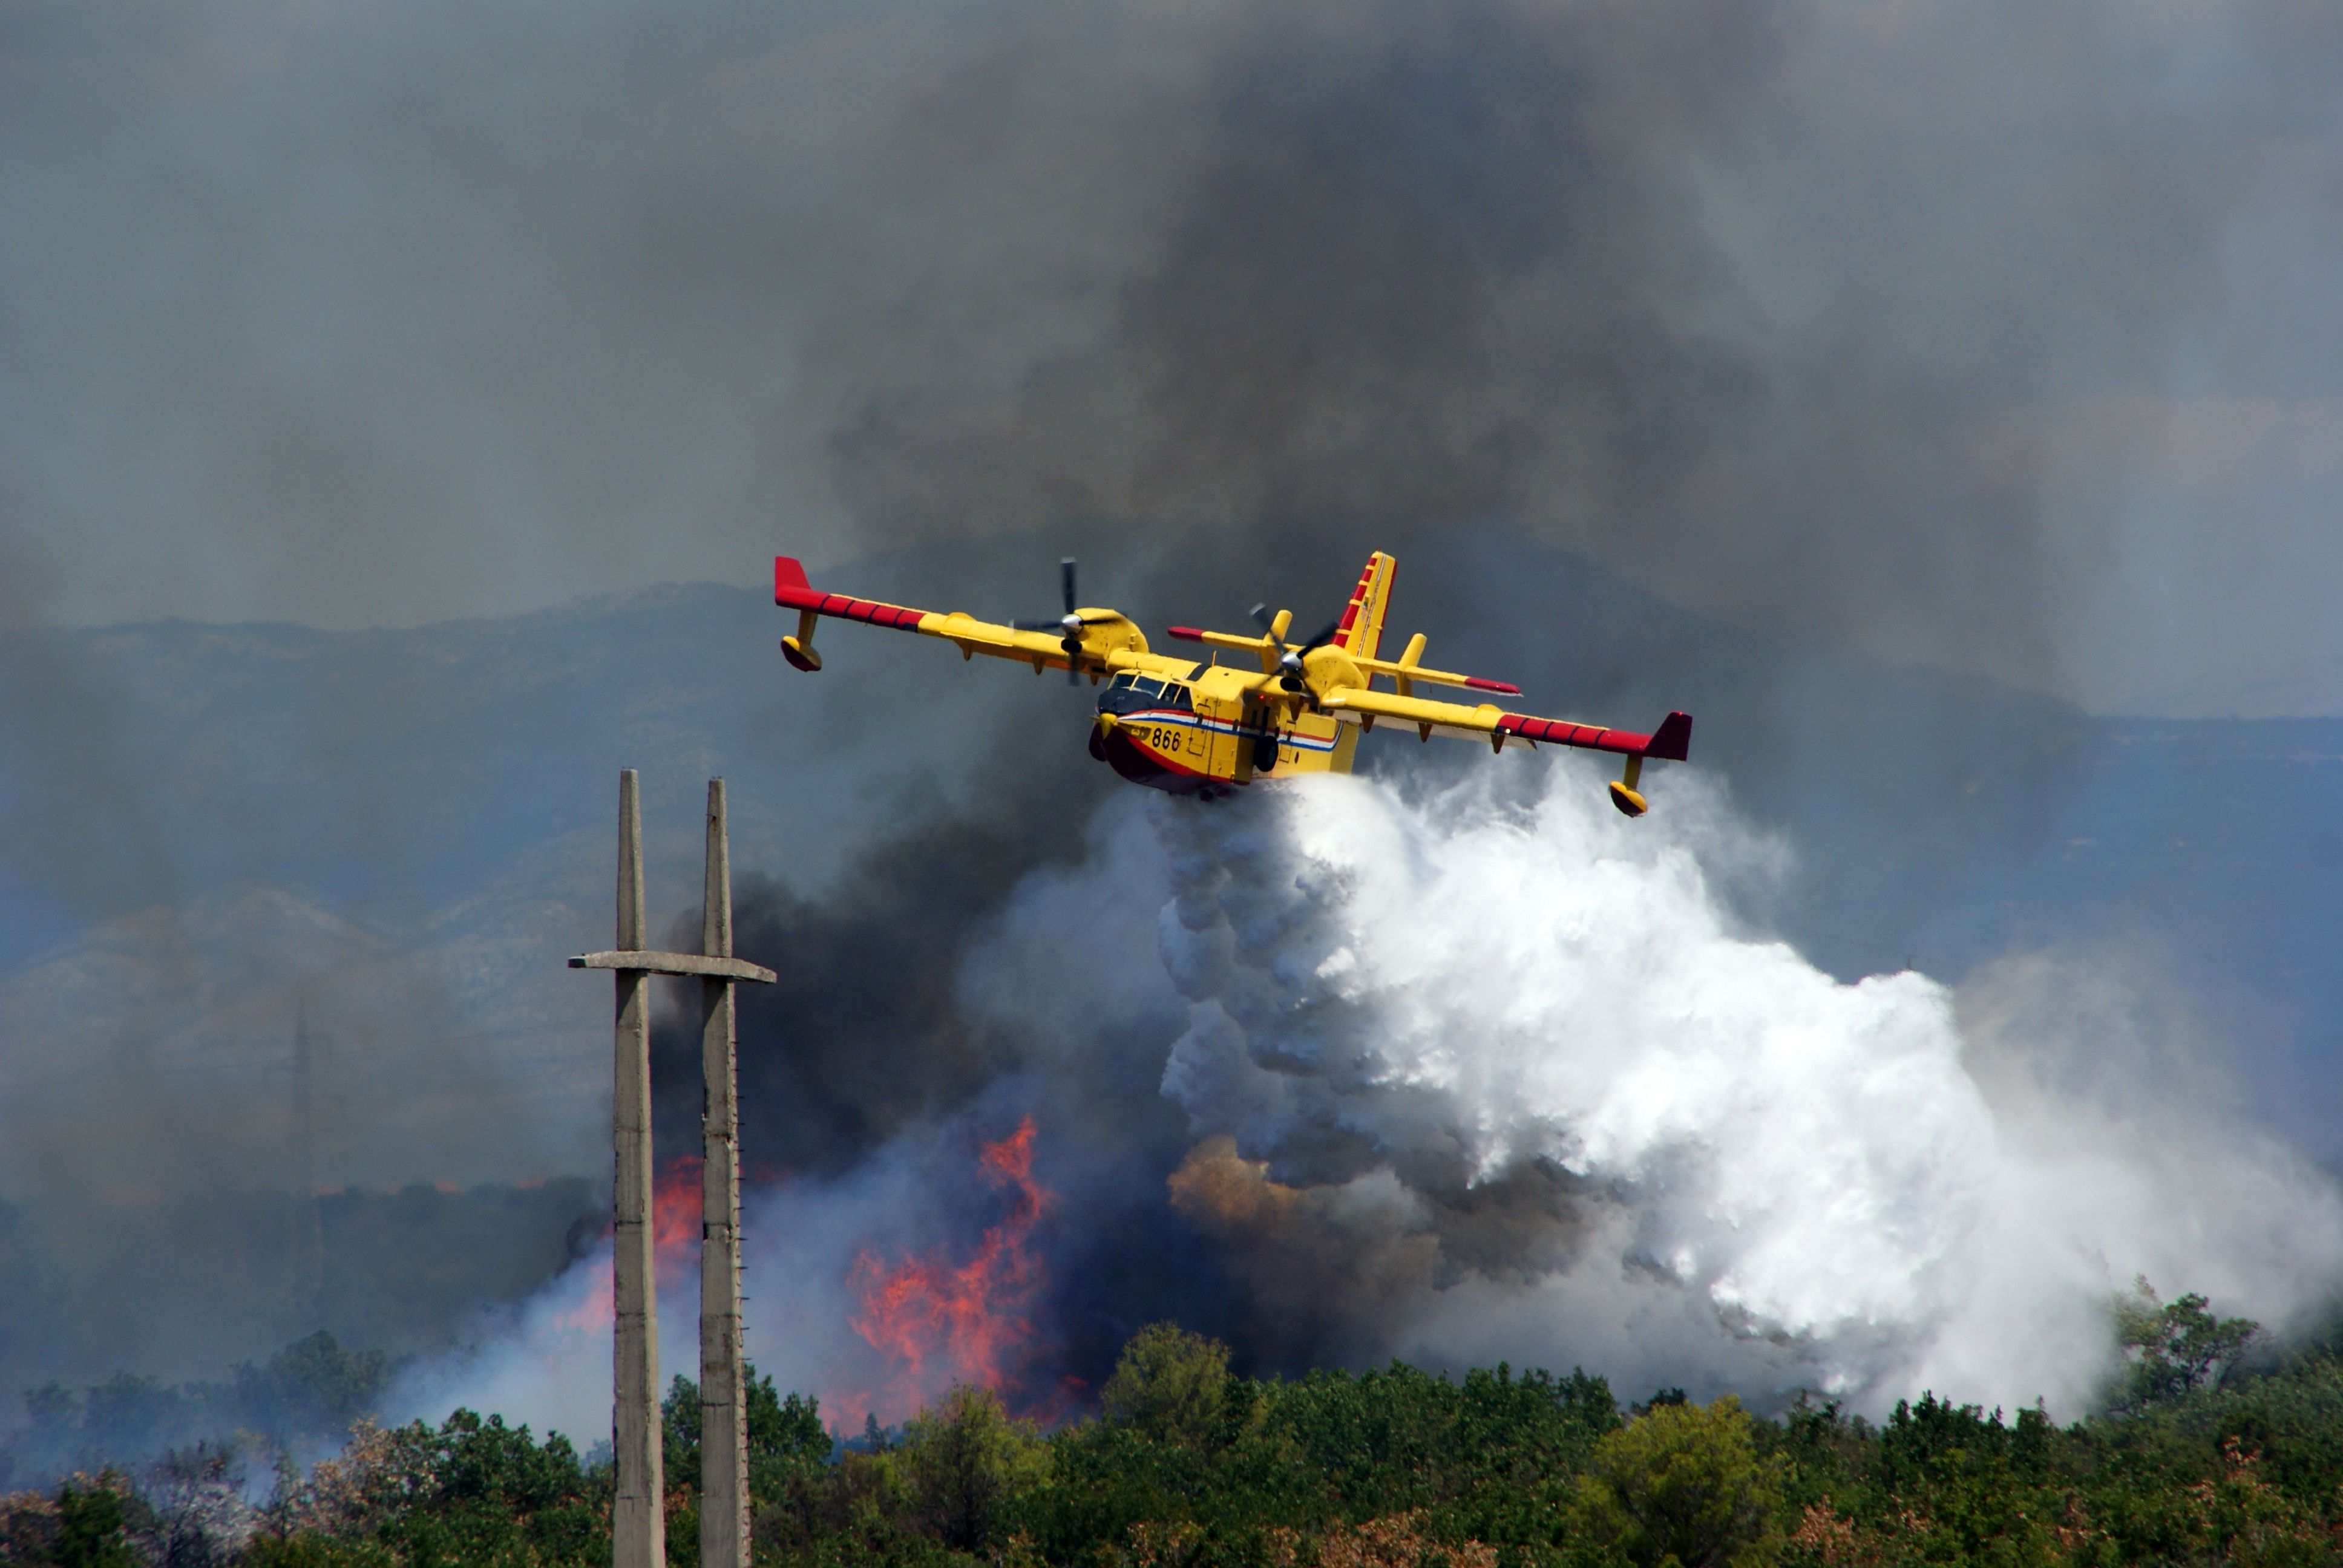 A CL-415 Being used to fight a fire.